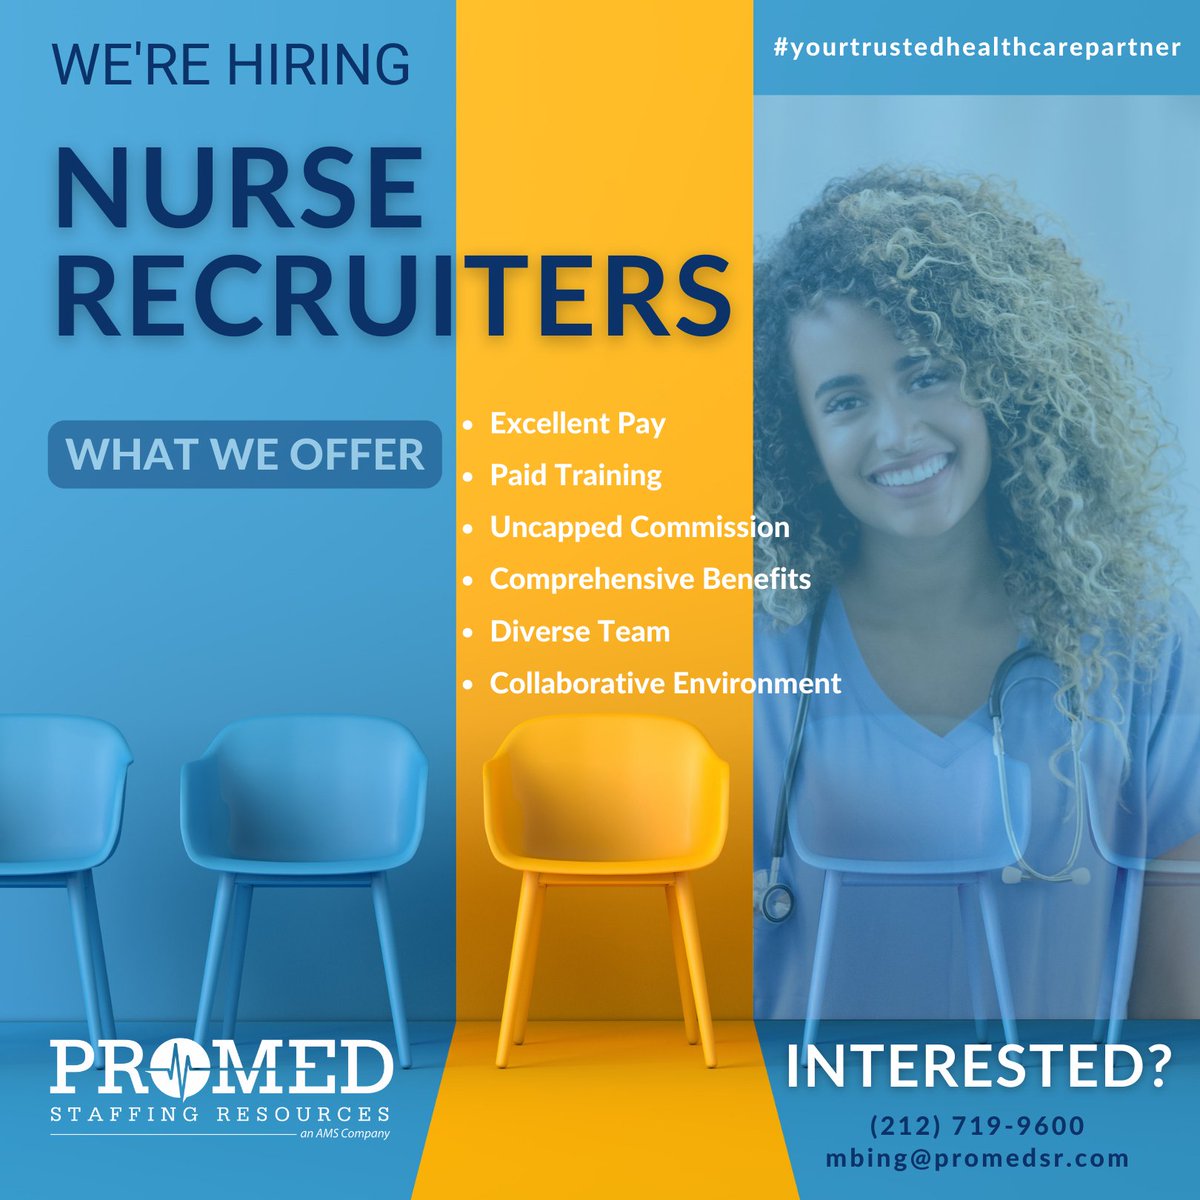 Are you an experienced #nurserecruiter ready to soar to new heights? Reach out to Maria Bingeman at mbing@promedsr.com to embark on an exciting new #careerjourney today!

#healthcarestaffing #nursestaffing #resumebuilding #mockinterview #nursing #nursingjobs #jobposting #promedsr